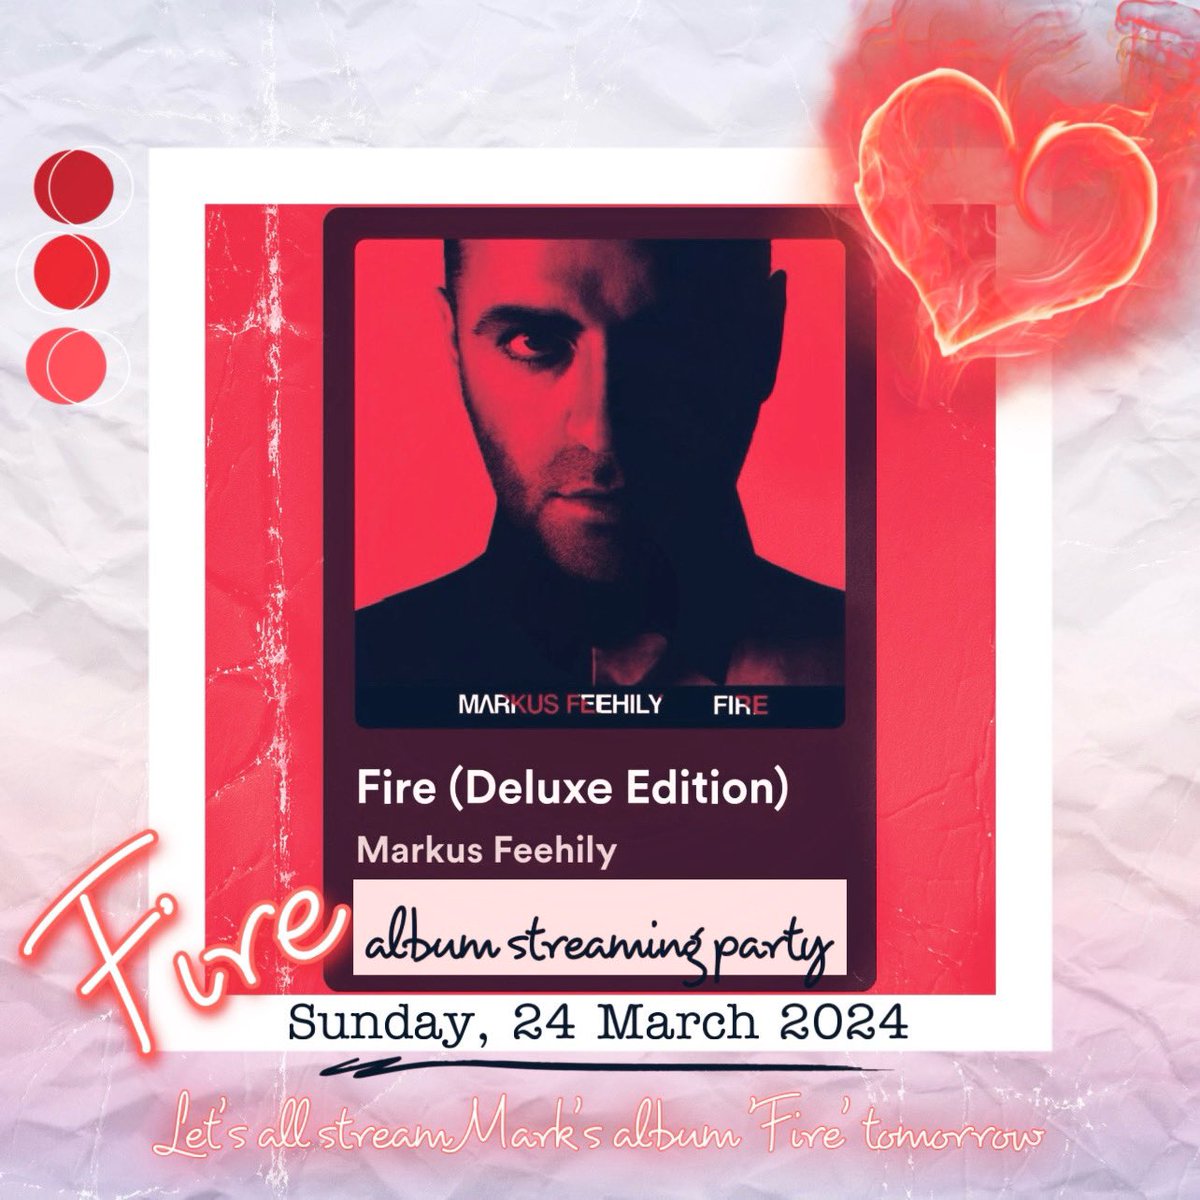 🔥@/westlifersindonesia on Instagram had a brilliant idea!💡 Let’s all join @MarkusFeehily’s ‘Fire’ album streaming party tomorrow, Sunday🔥😊♥️🎵 Stream his album whenever you can tomorrow and show him all your love and support✨ We love you more than words can say Marky!🫶